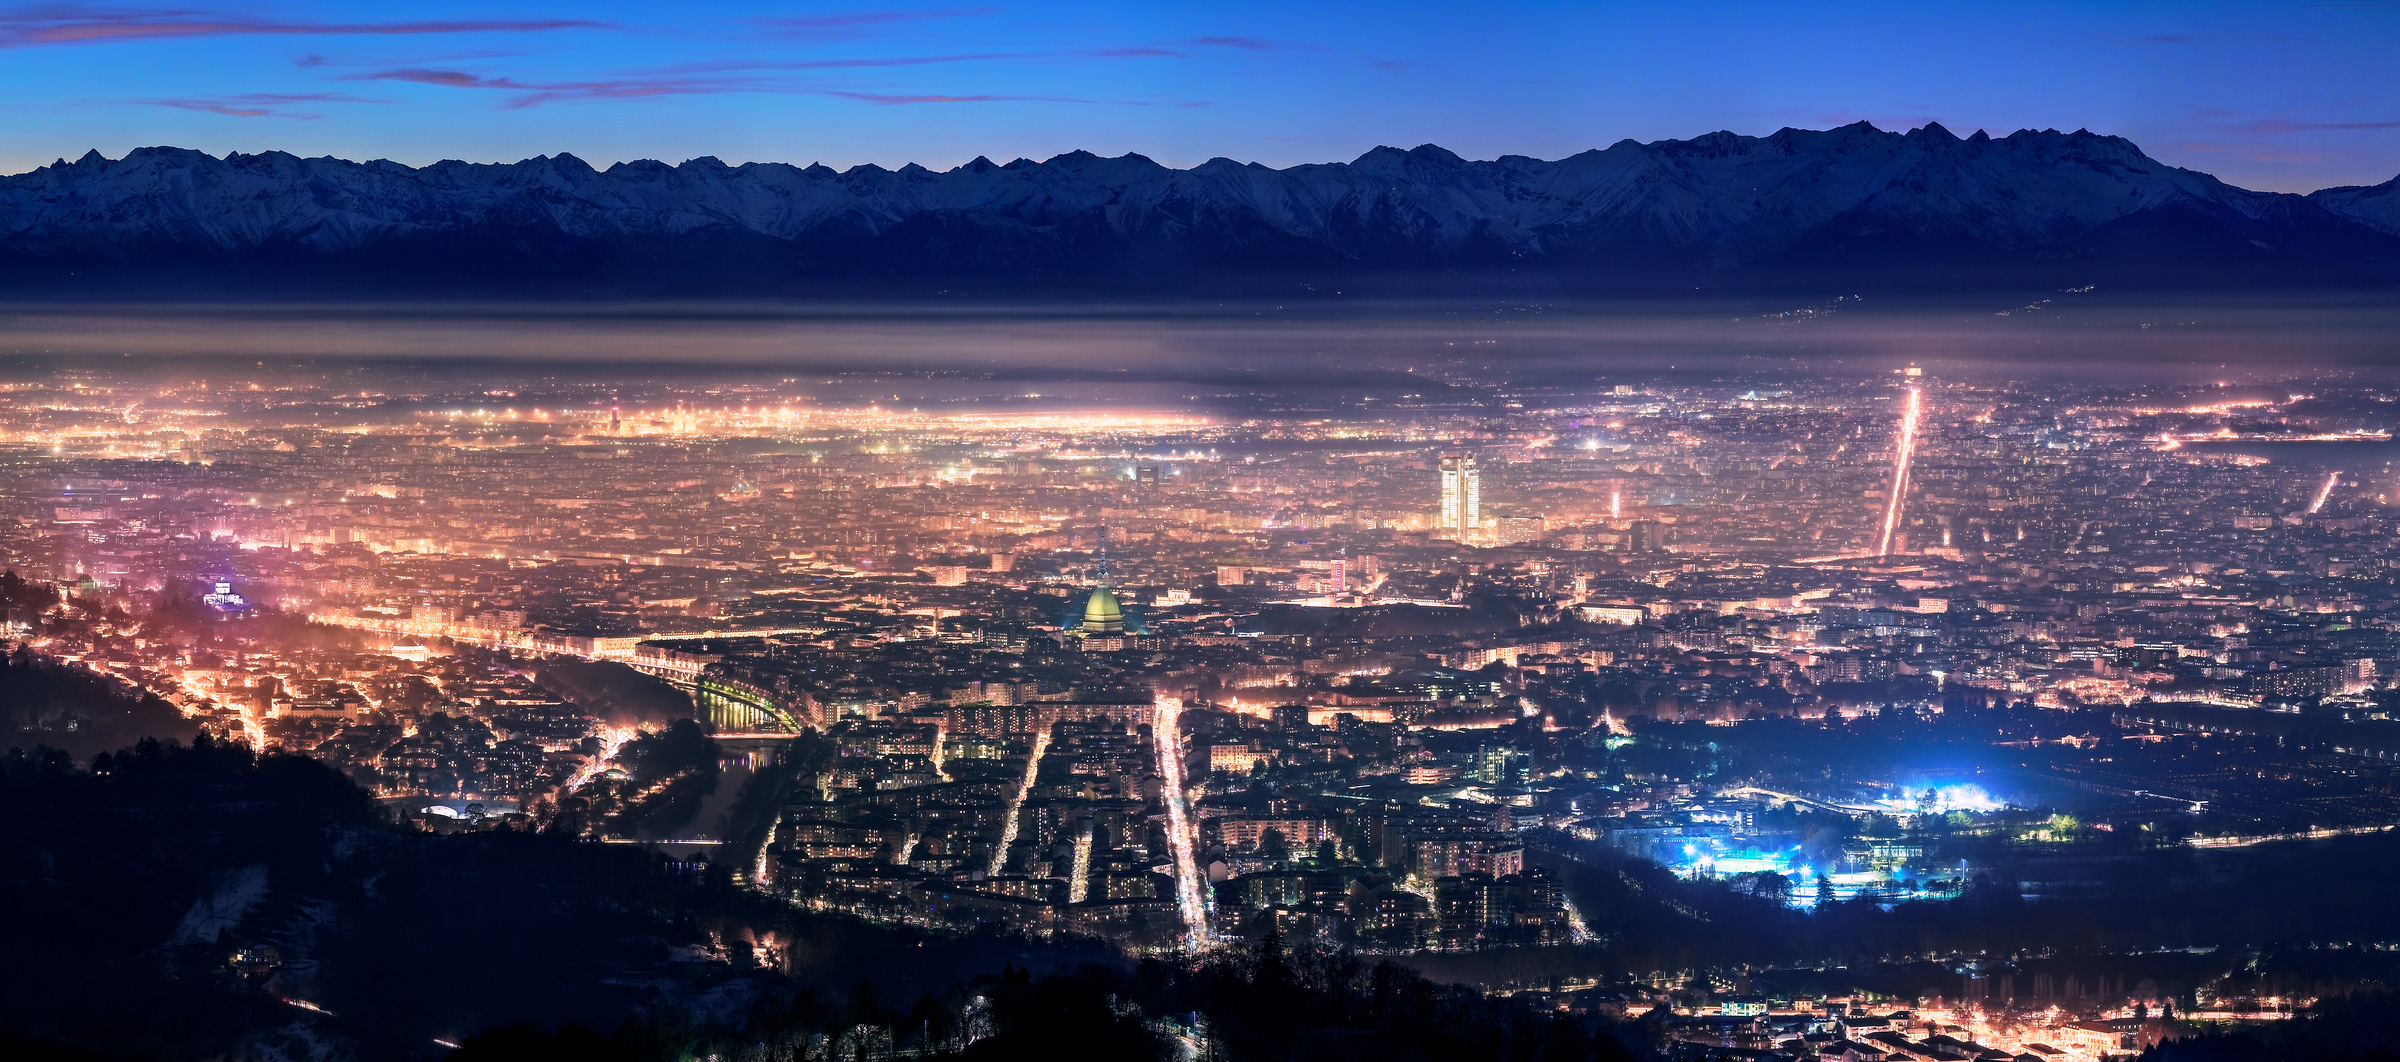 613 megapixels! A very high resolution, large-format VAST photo print of Turin, Italy at night; photograph created by Duilio Fiorille in Turin, Piedmont, Italy